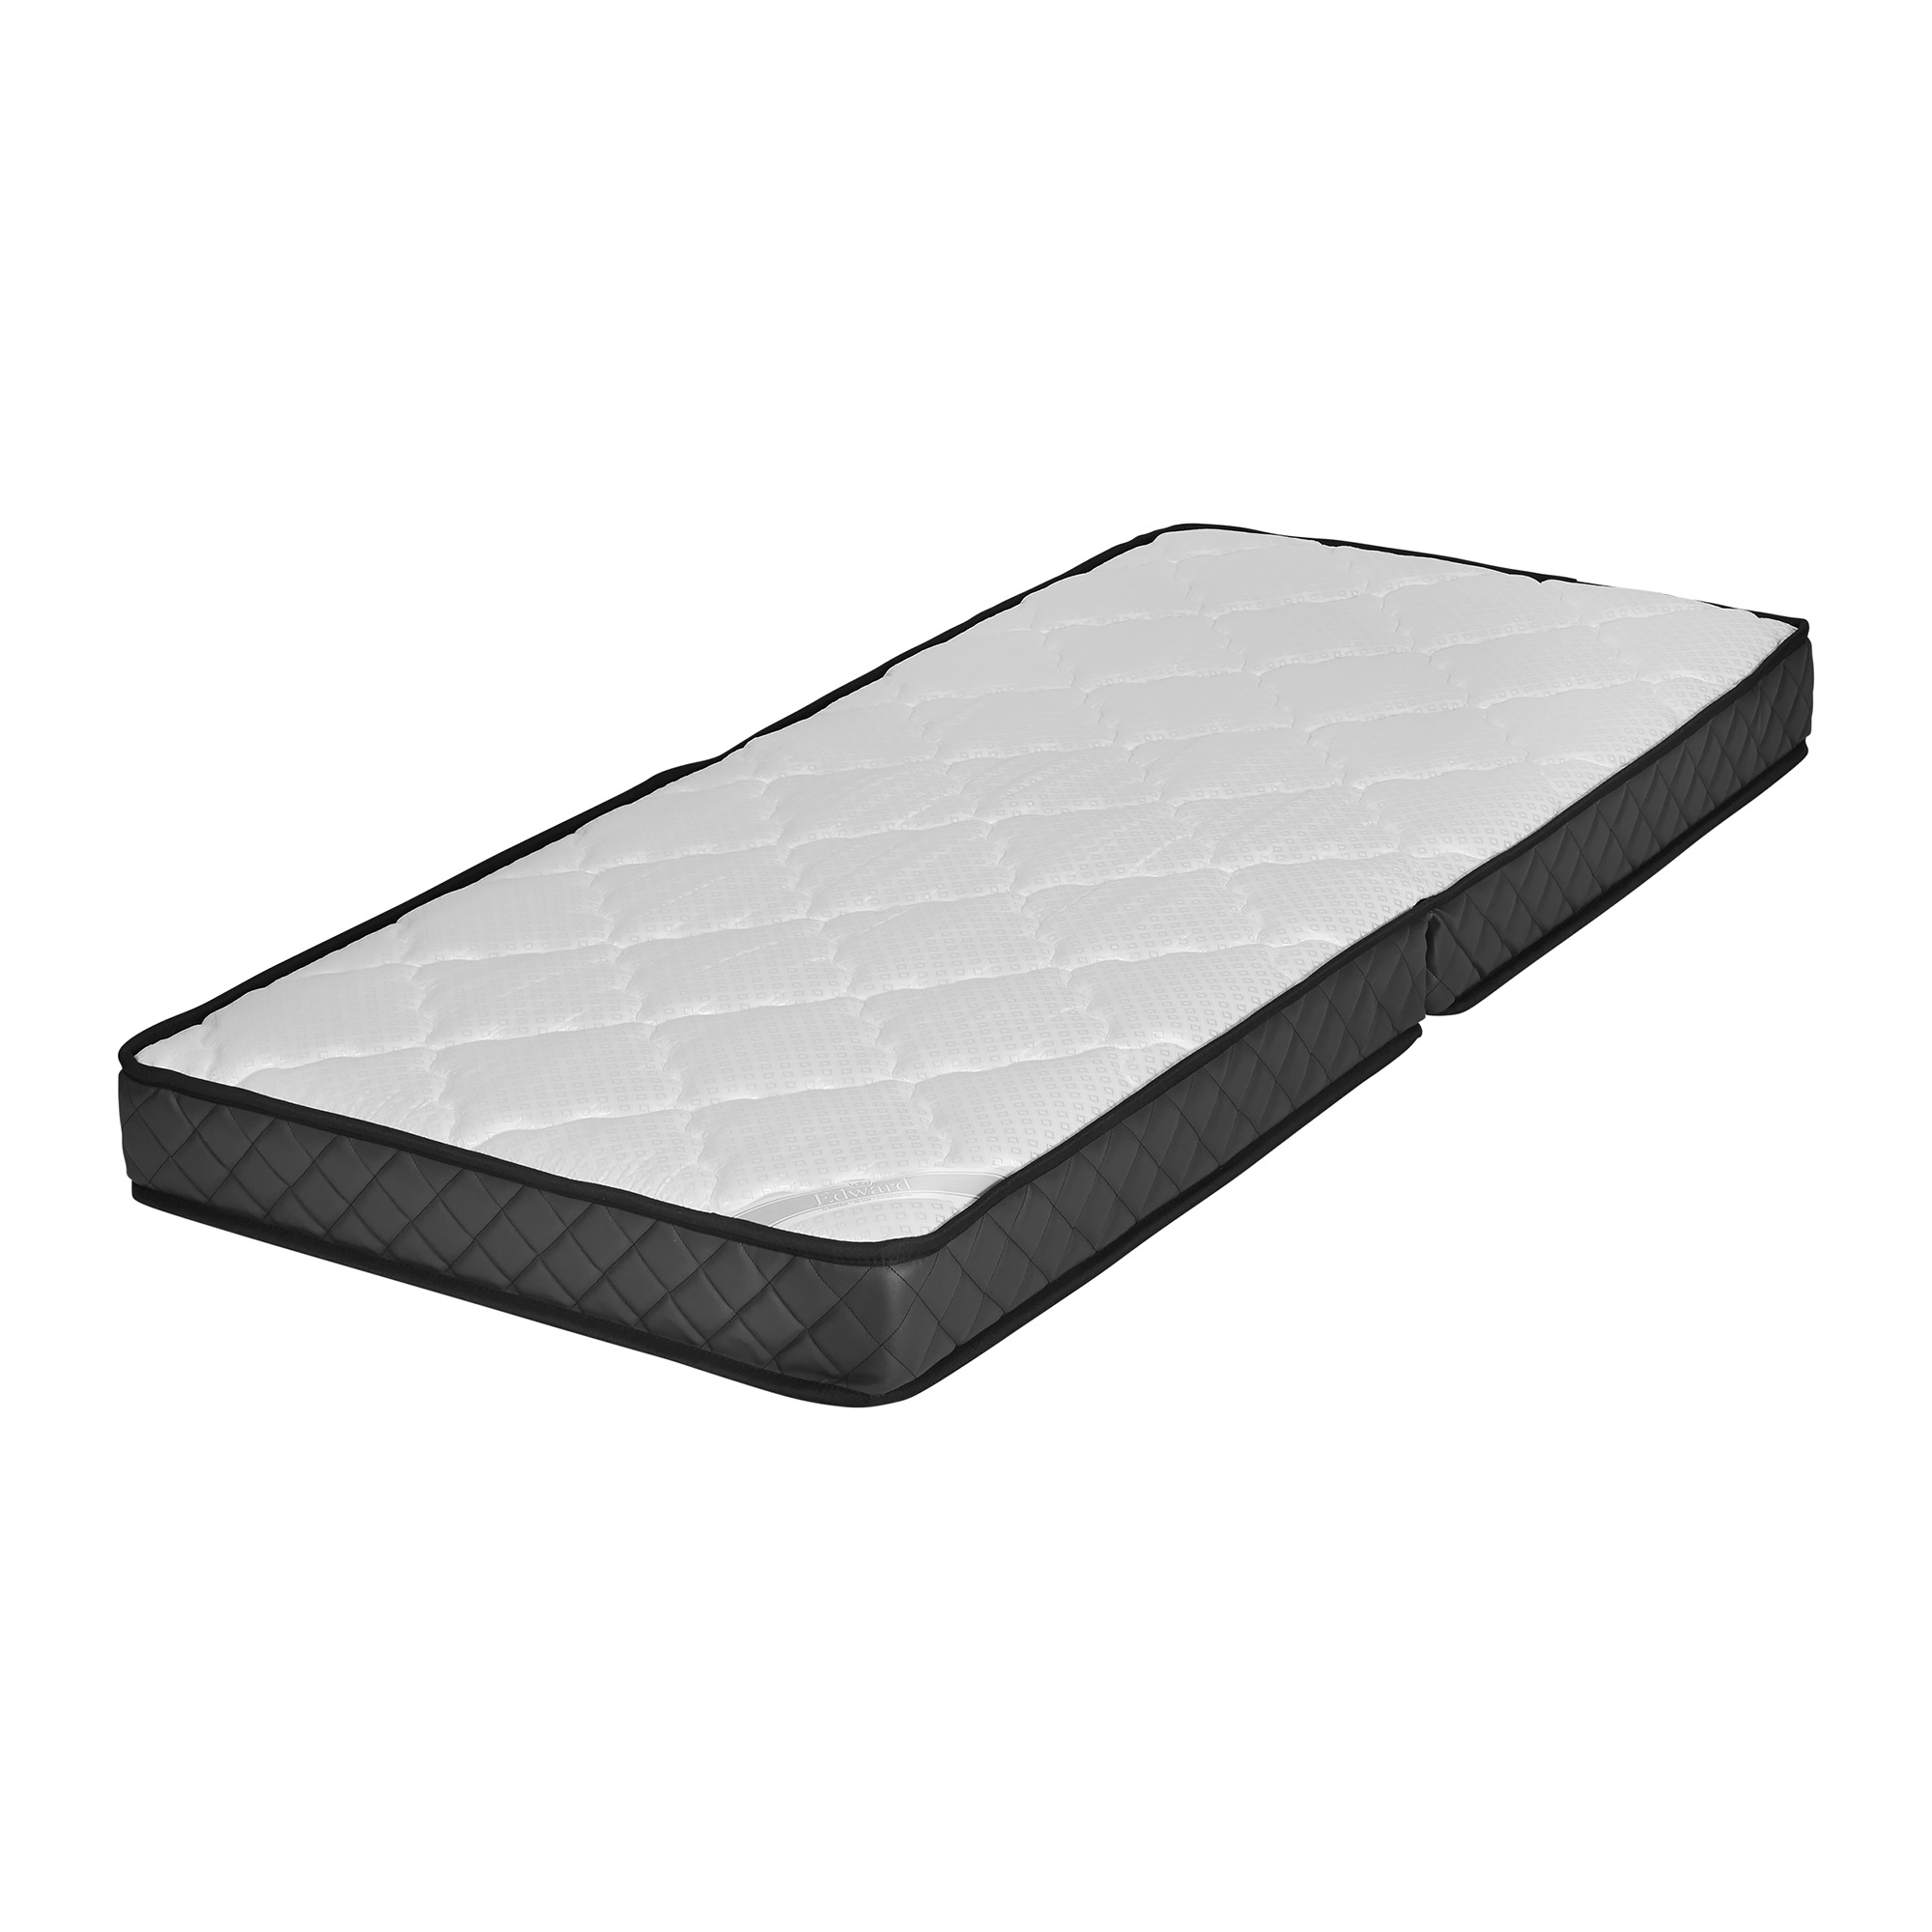 Replacement mattress for Edward Ritz PU Leather. Extra firm. Black